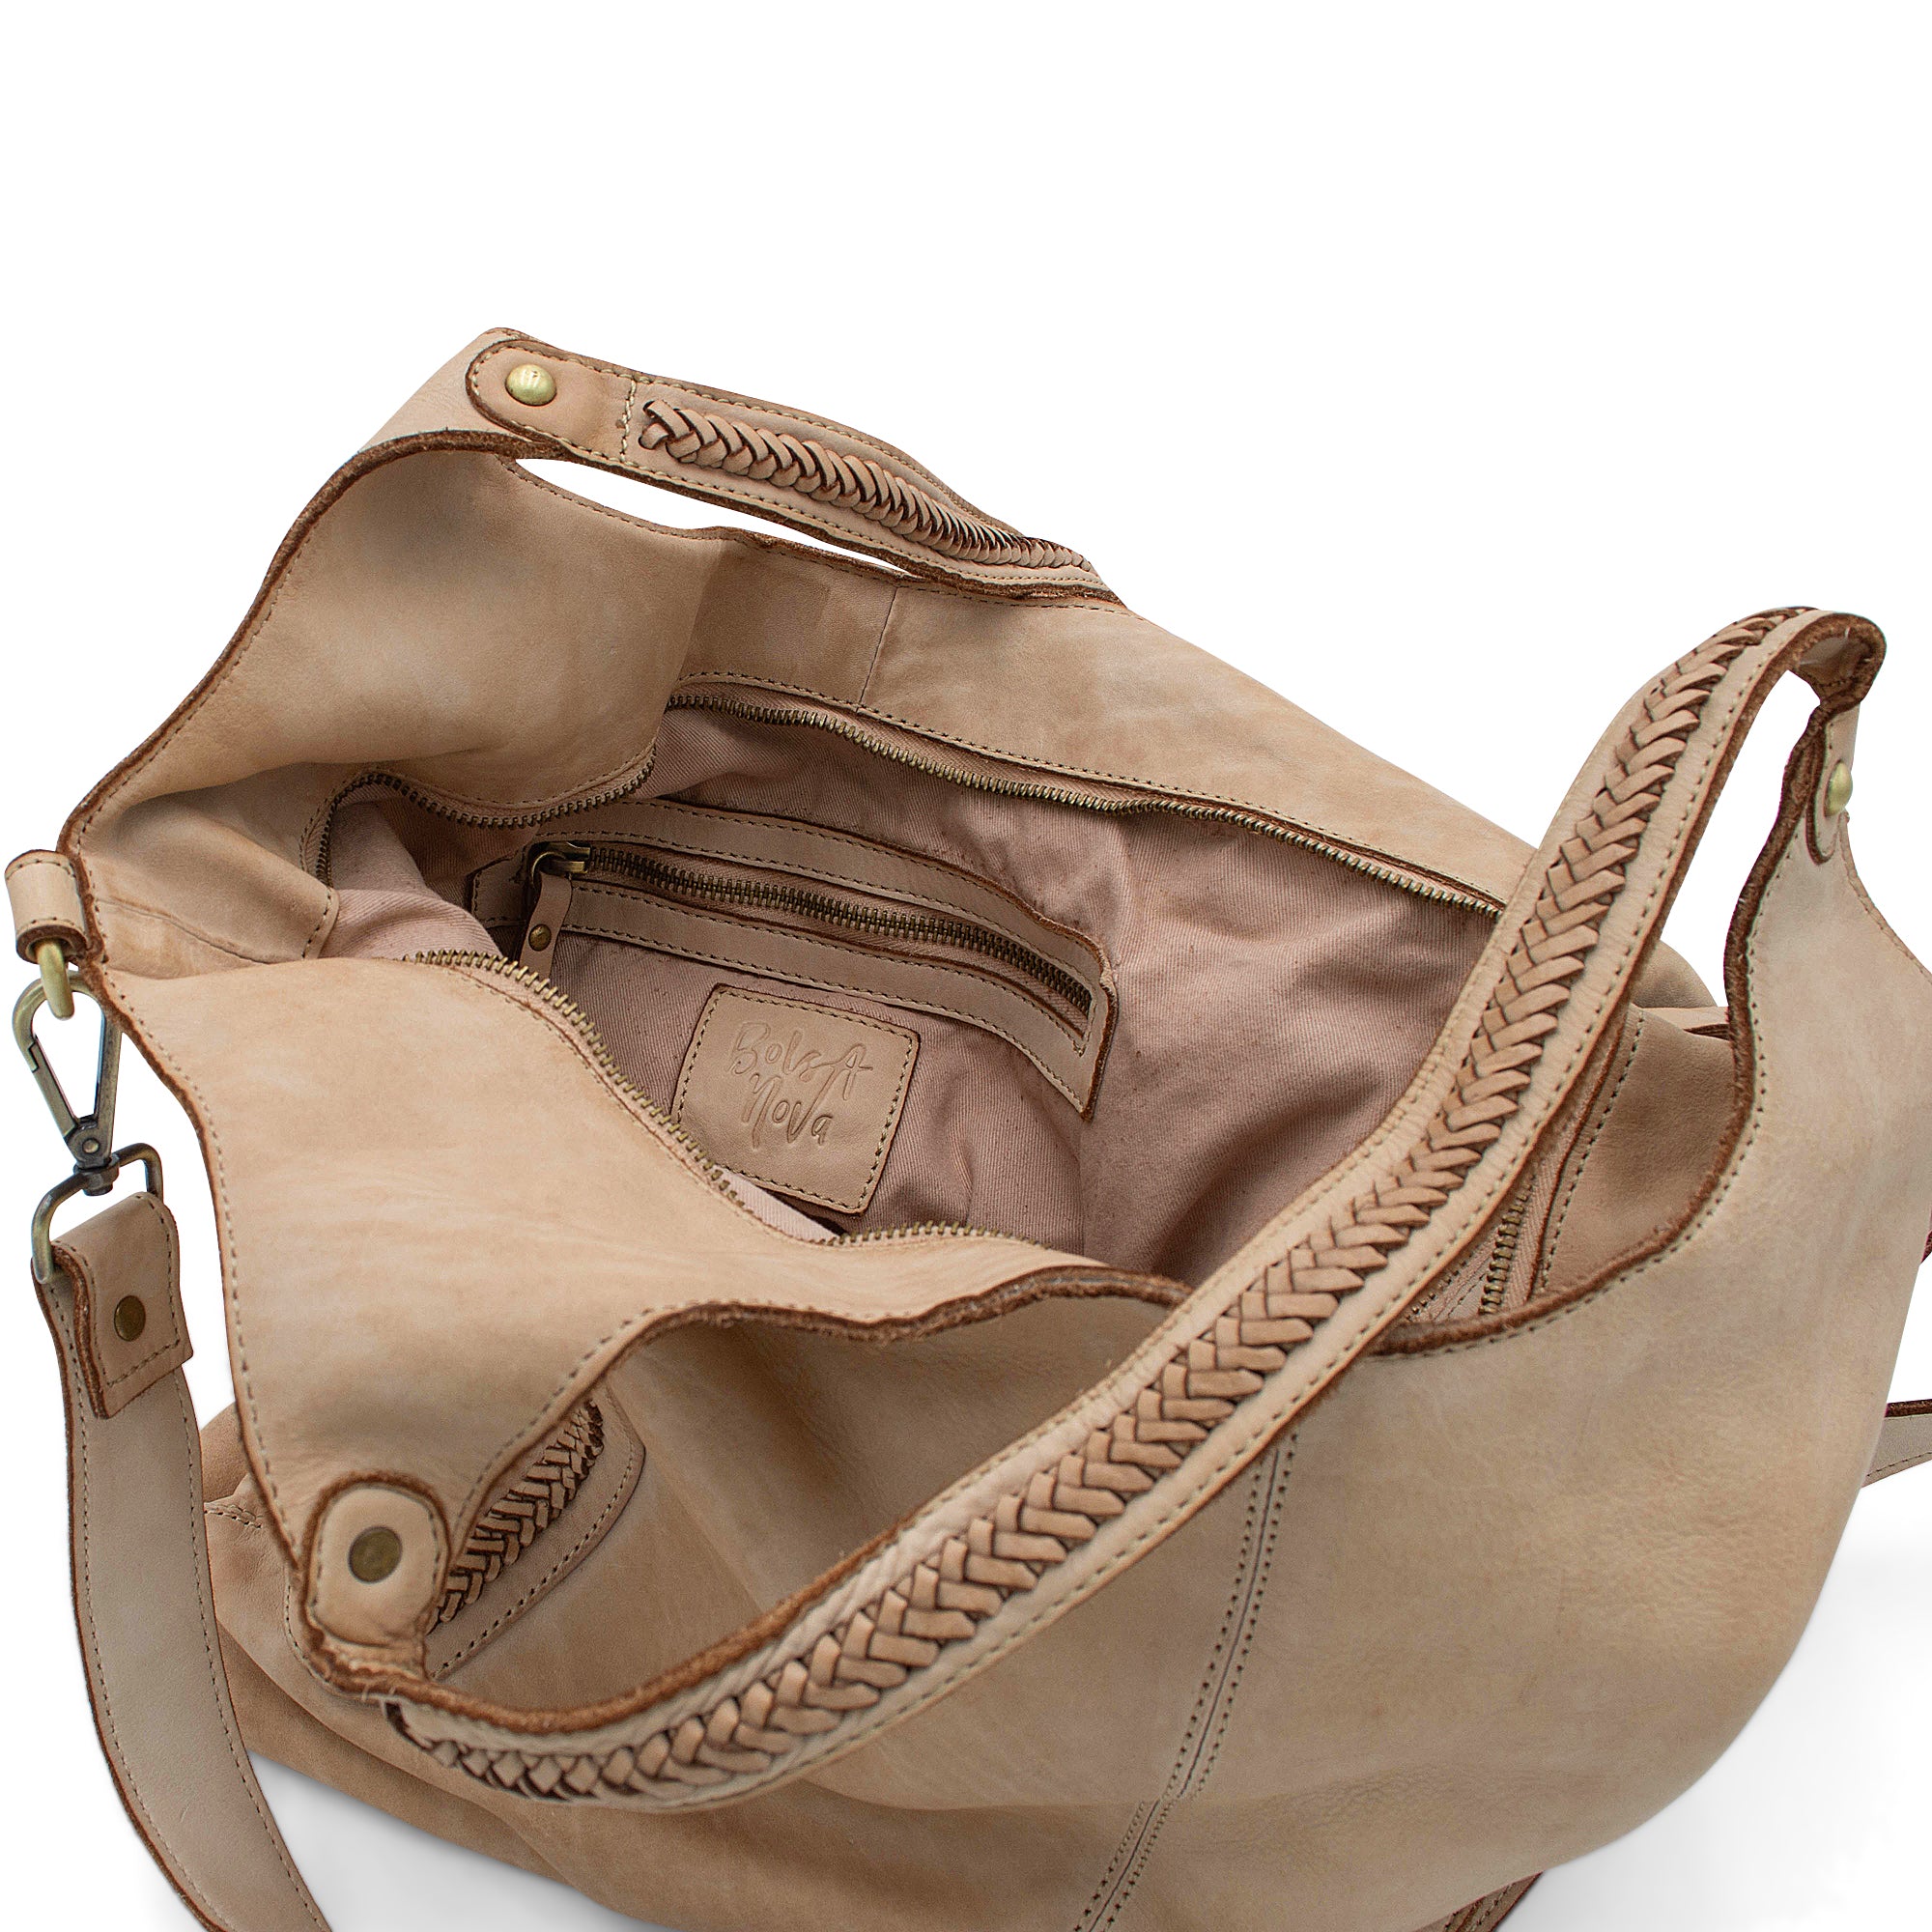 Julia Slouchy Tote in Light Taupe